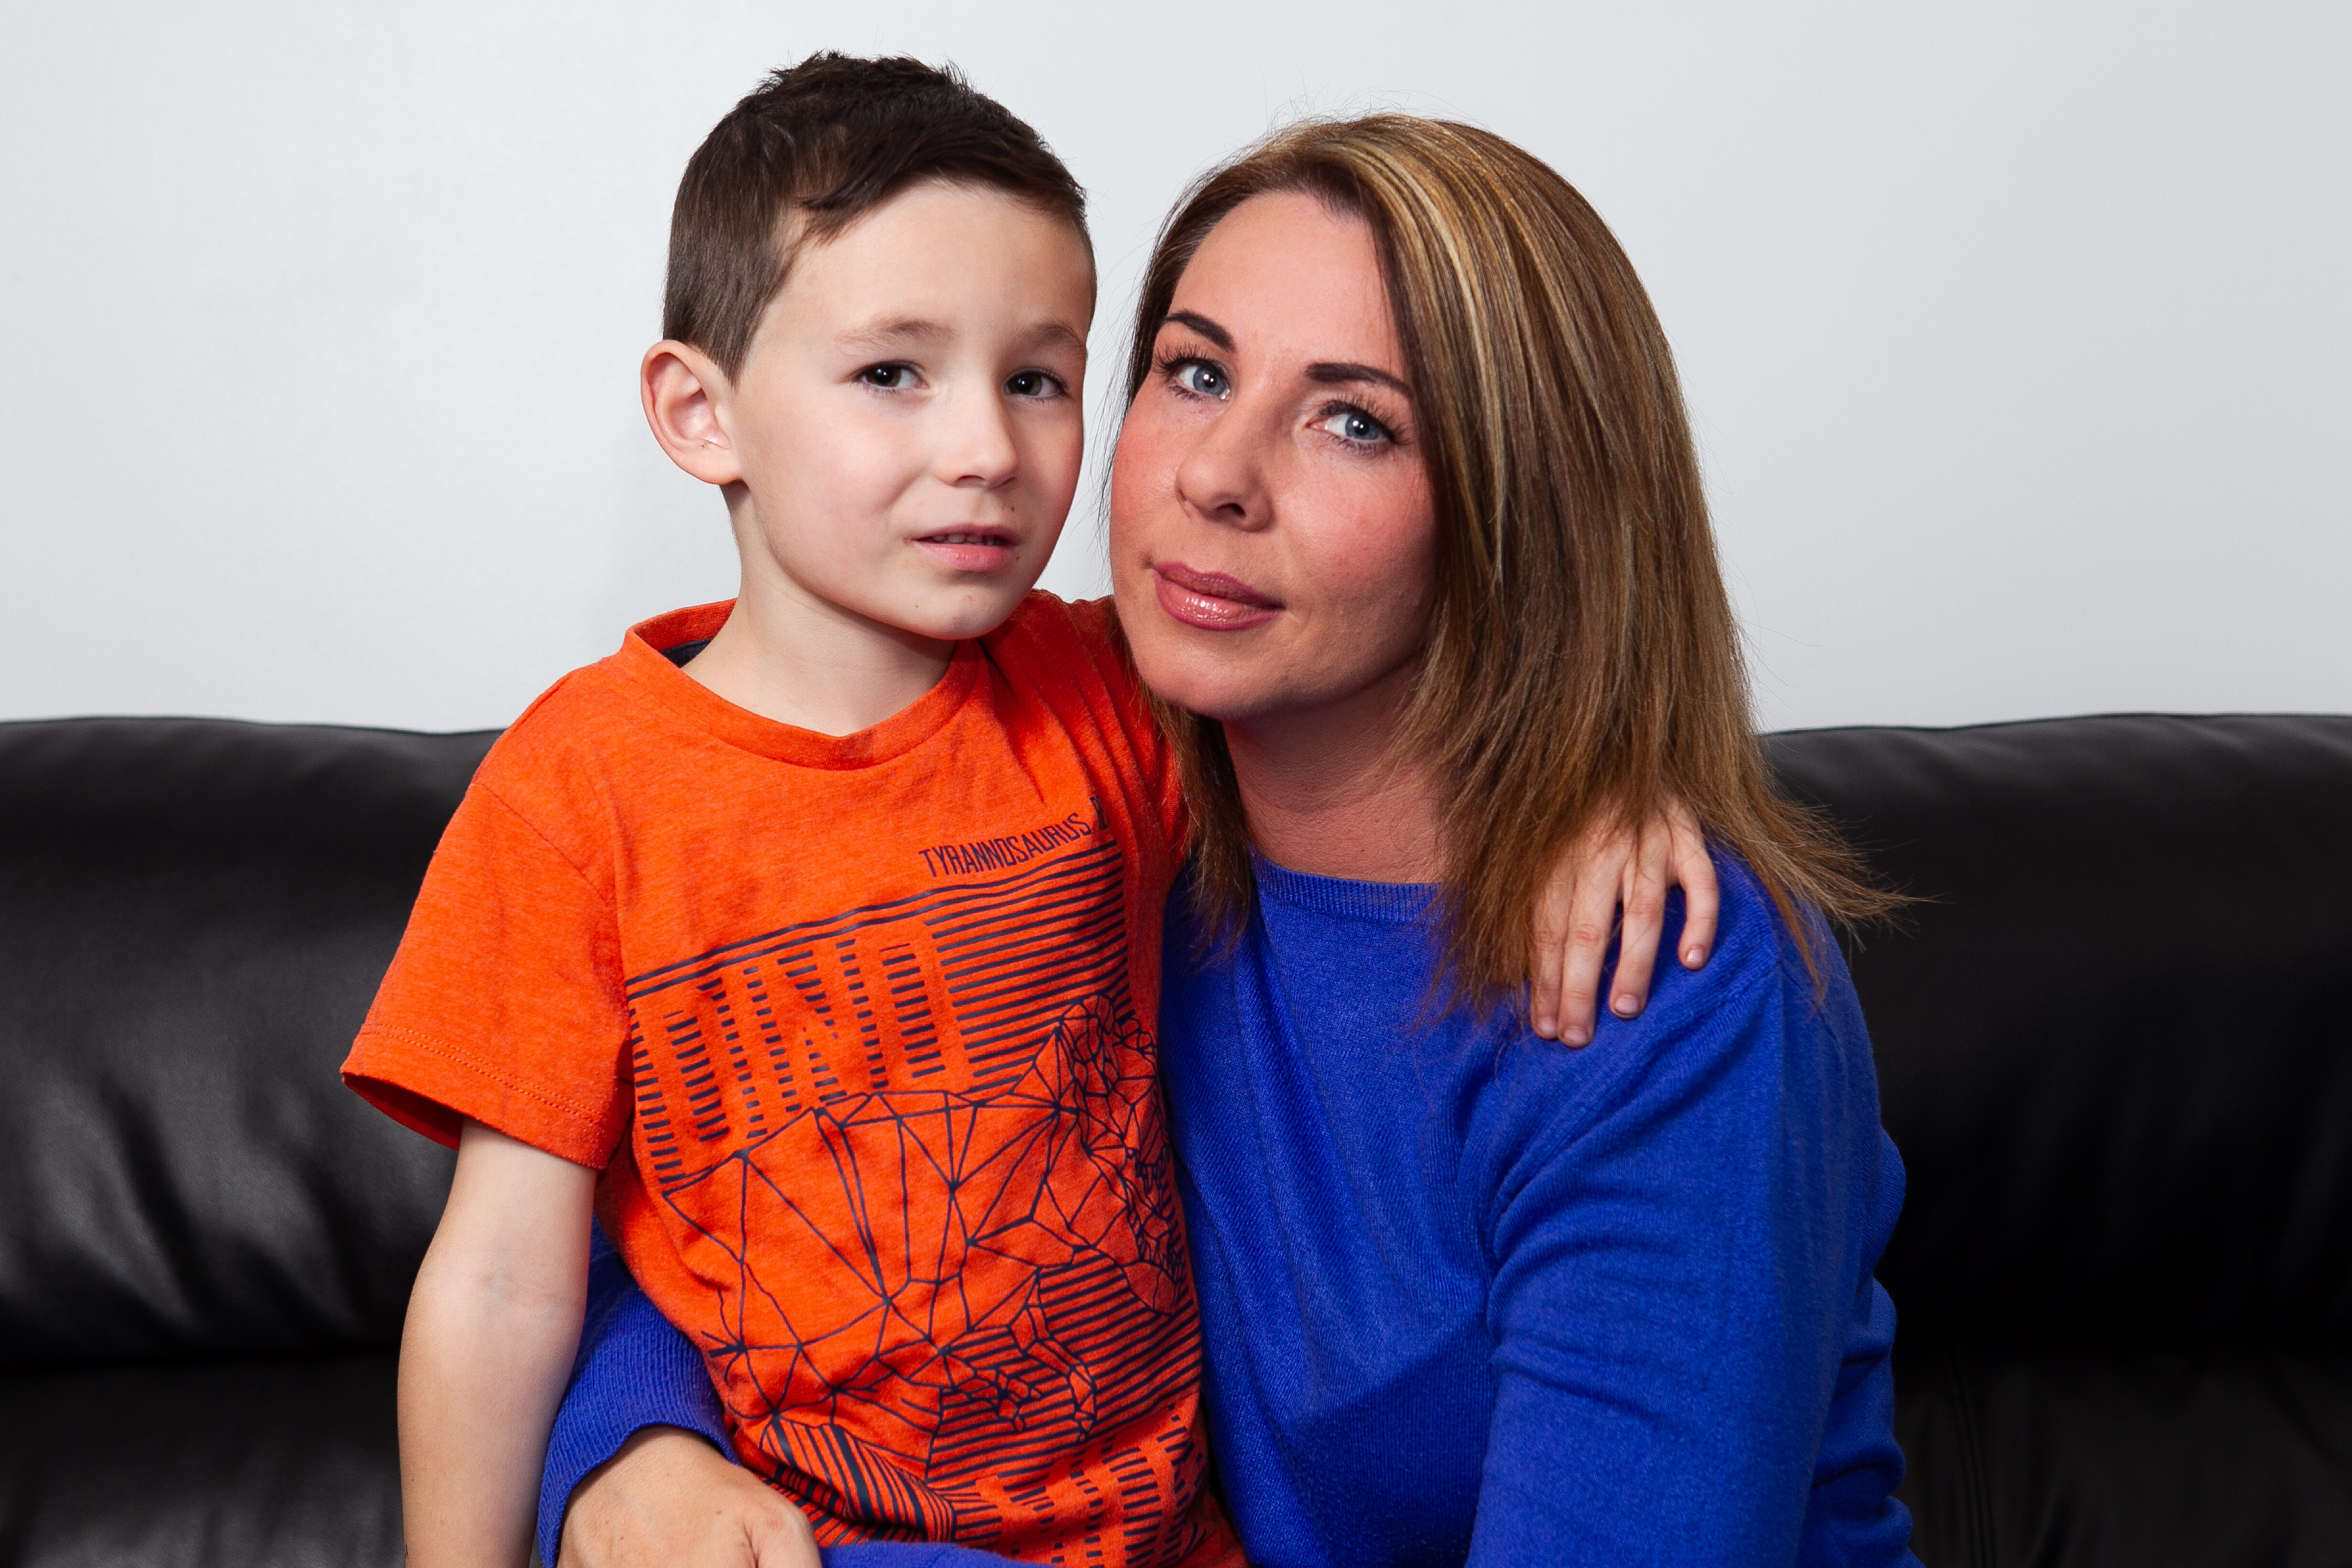 Lisa Quarrell, and her son, Cole, who has Epilepsy. Cole needs cannabis oil to treat his condition, but Lisa is concerned despite the rule change regarding its use, Cole won't get it in time. (Andrew Cawley)